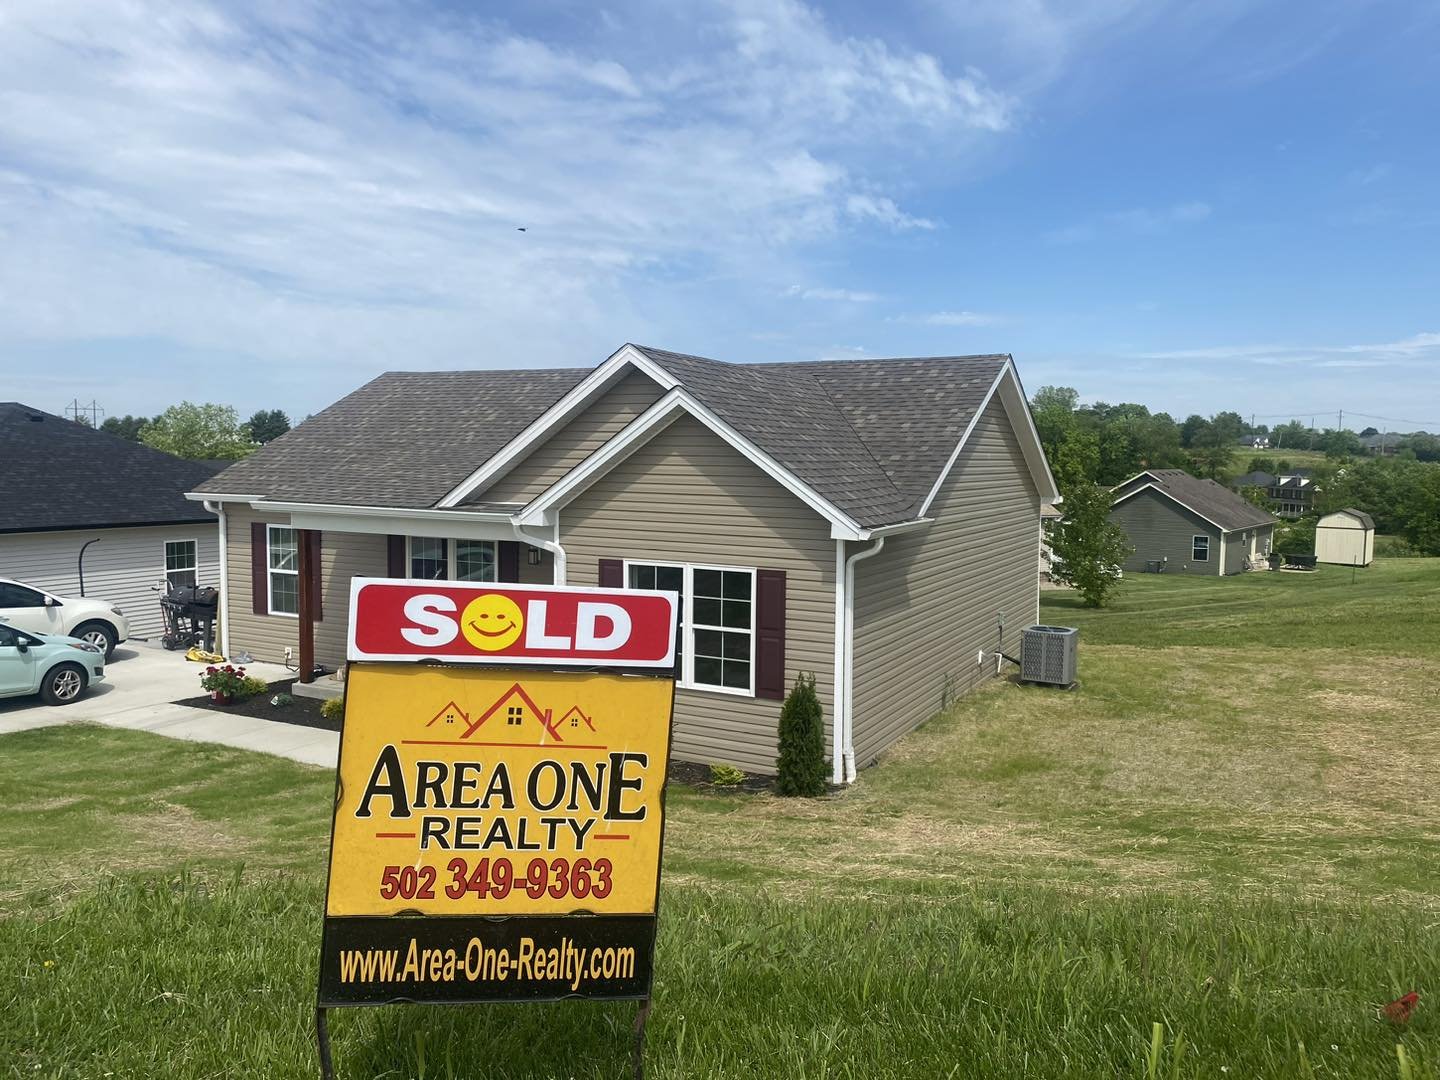 🏡 SOLD 🏡 SOLD🏡 SOLD🏡 SOLD 🏡
Another wonderful new construction home 🏡 SOLD by Mike &amp; Kathy Ballard of Area One Realty at 100 Early Times Blvd located in the Woodlawn area of historic Bardstown, Ky 

Thank you to our wonderful seller for cho